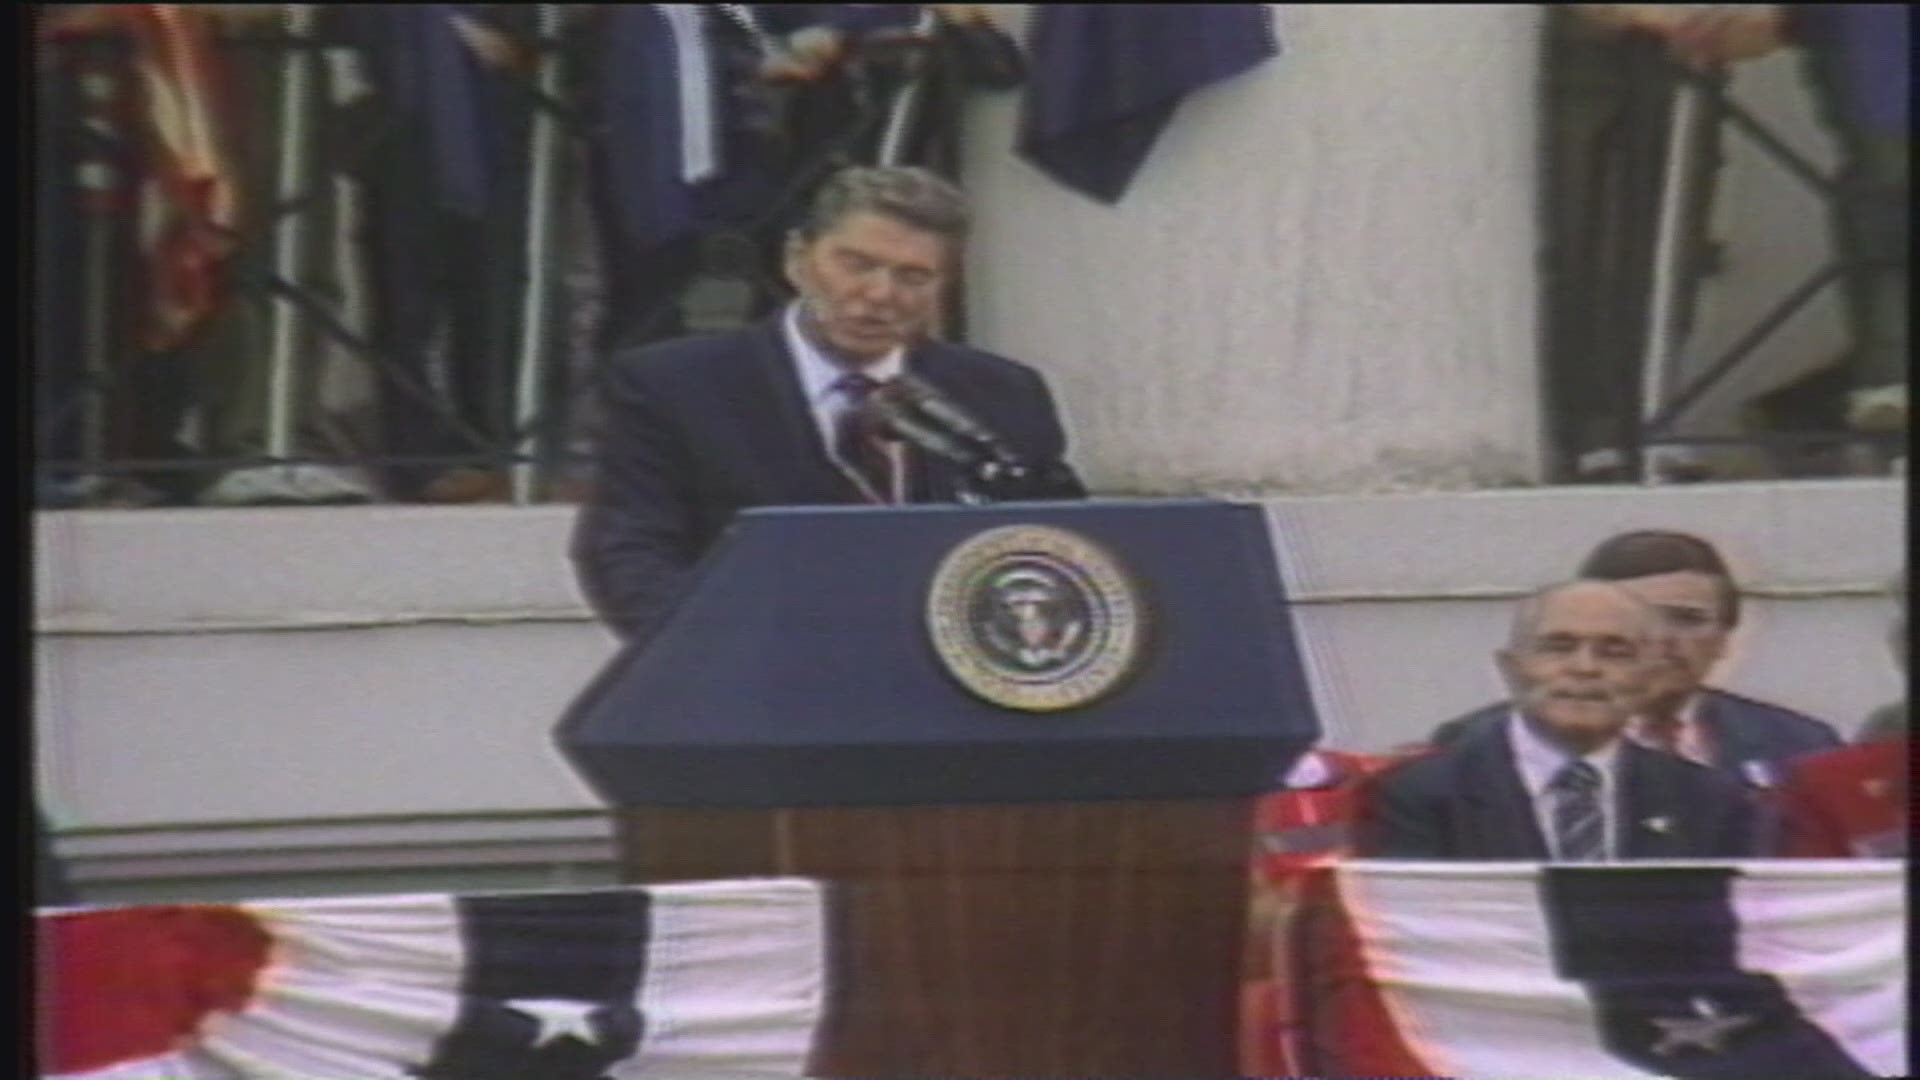 President Ronald Reagan visited Macon 35 years ago while he was campaigning for his second term. Here's archive footage of his speech from that day in October 1984.